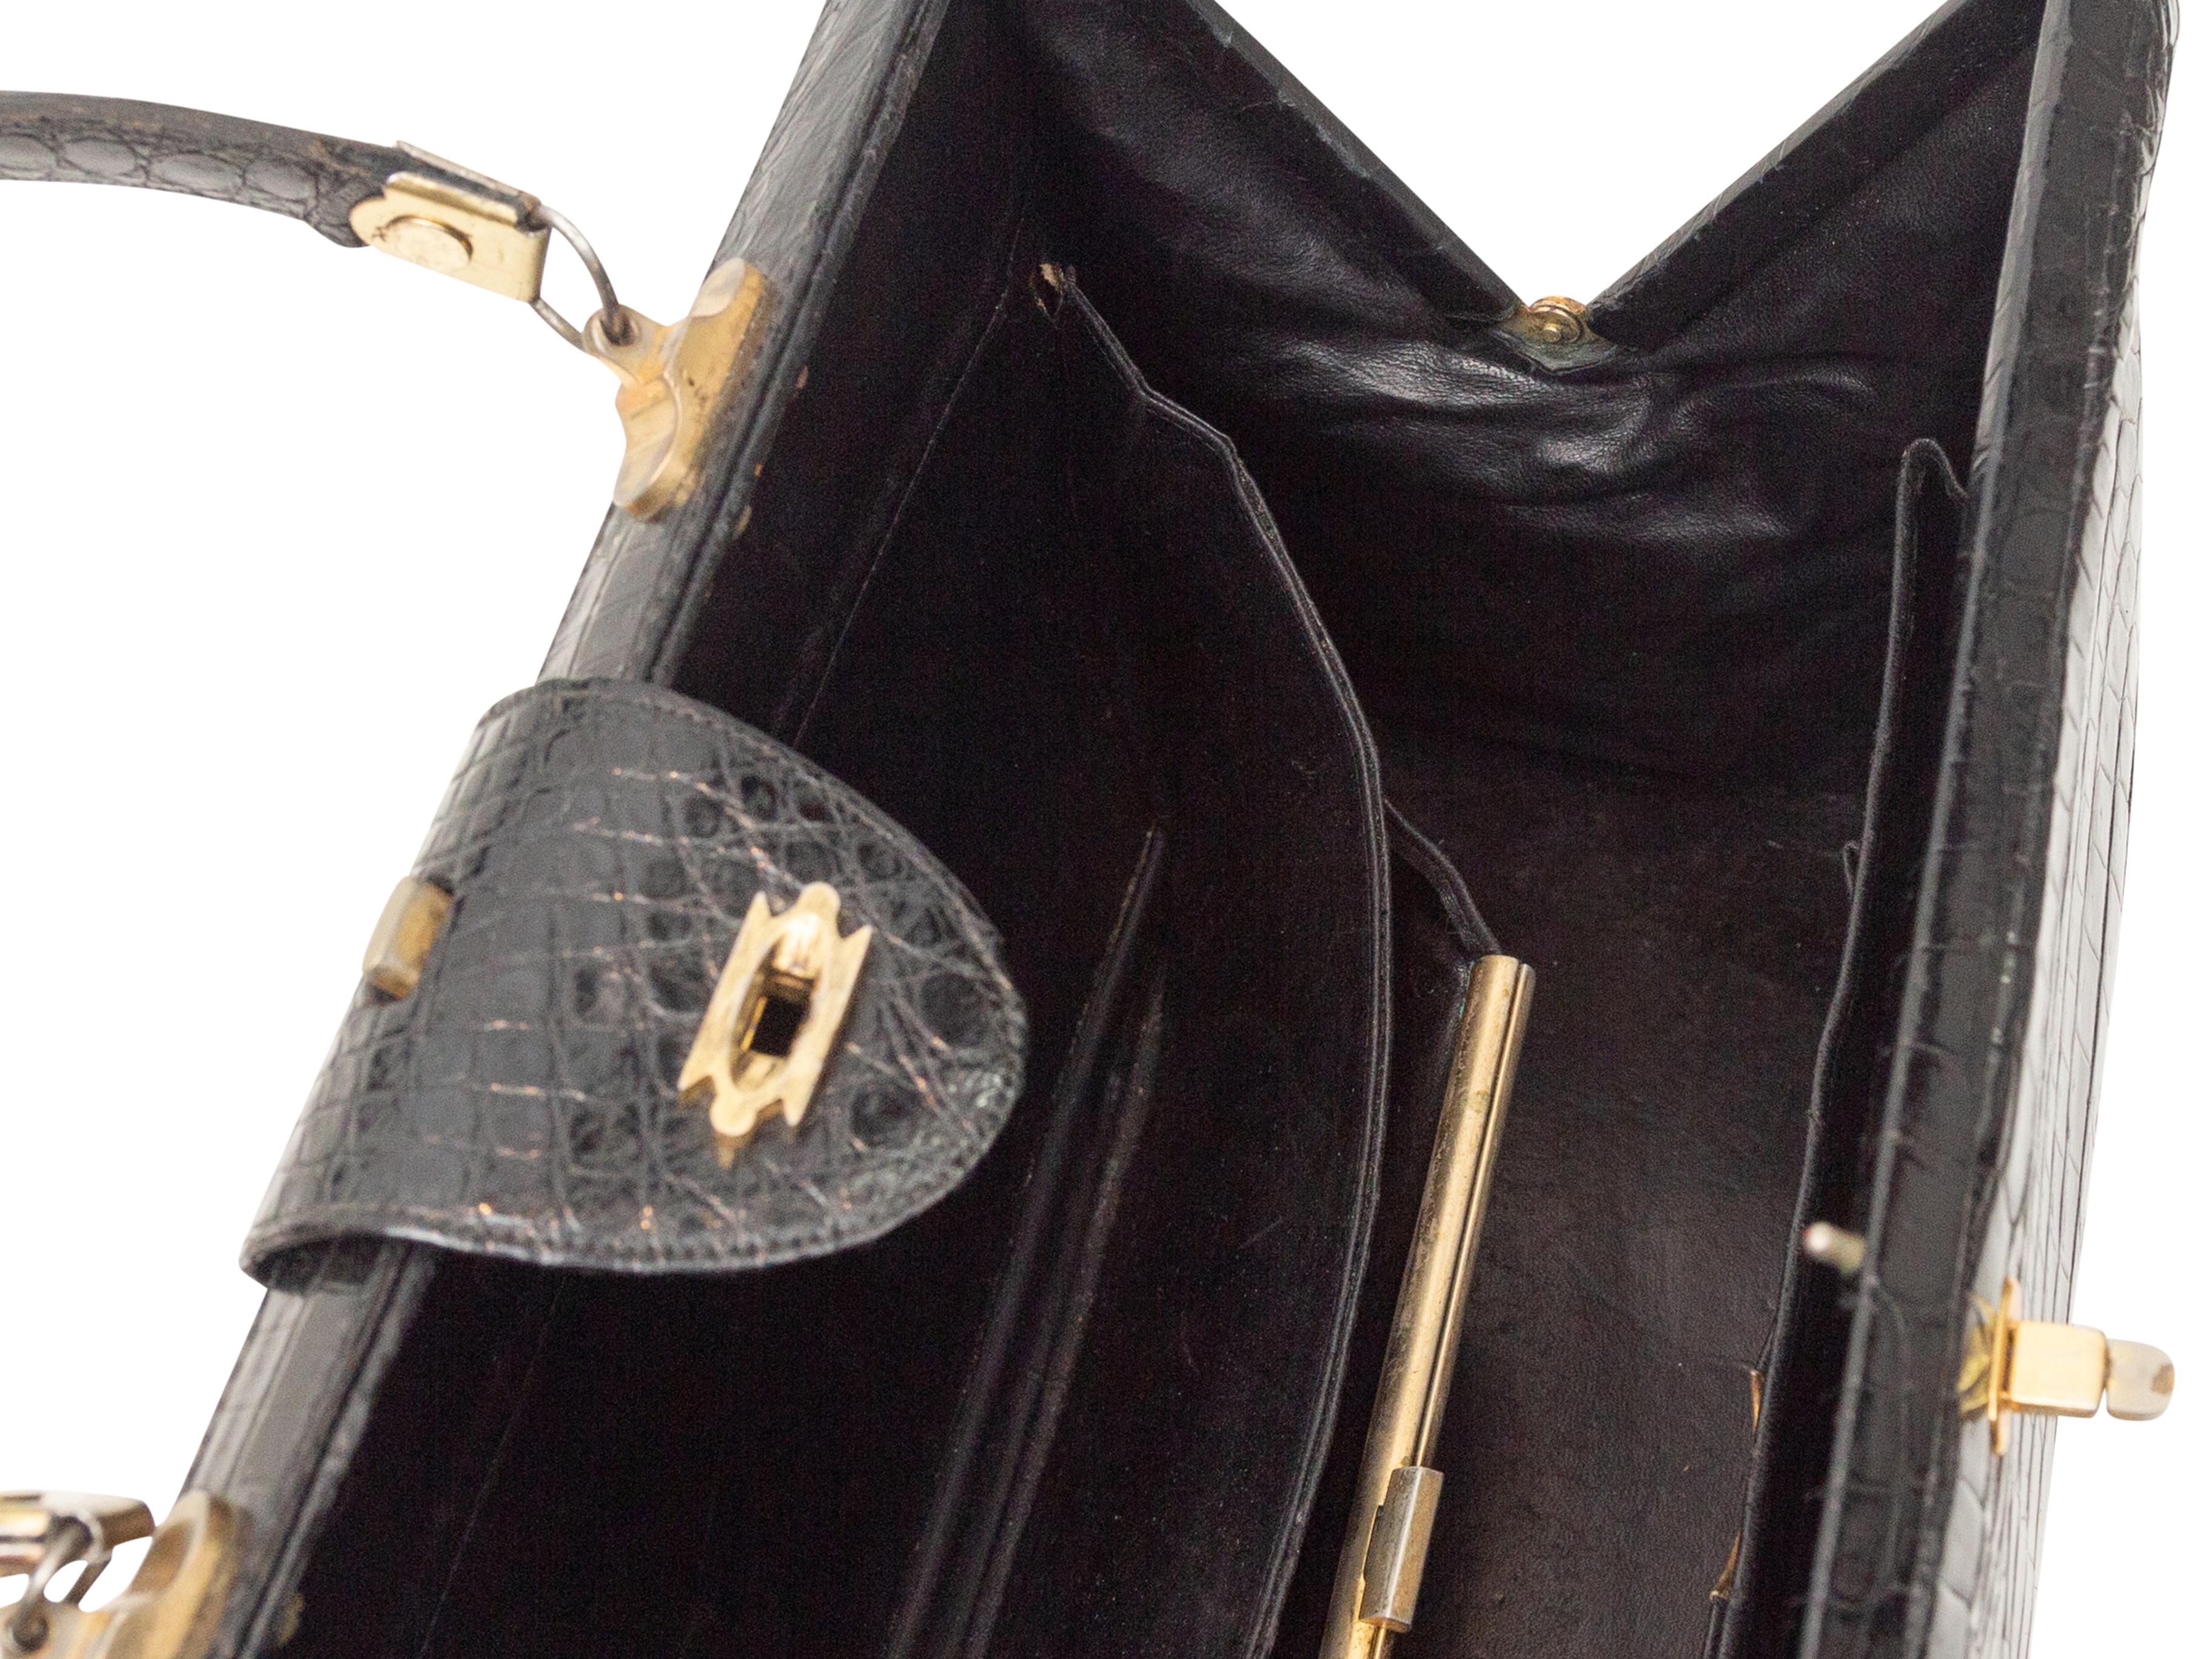 Product Details: Vintage Black Lederer Crocodile Handbag. This handbag features a crocodile body, gold-tone hardware, a single flat top handle, multiple interior pockets, and a clasp closure at the top. 15.25